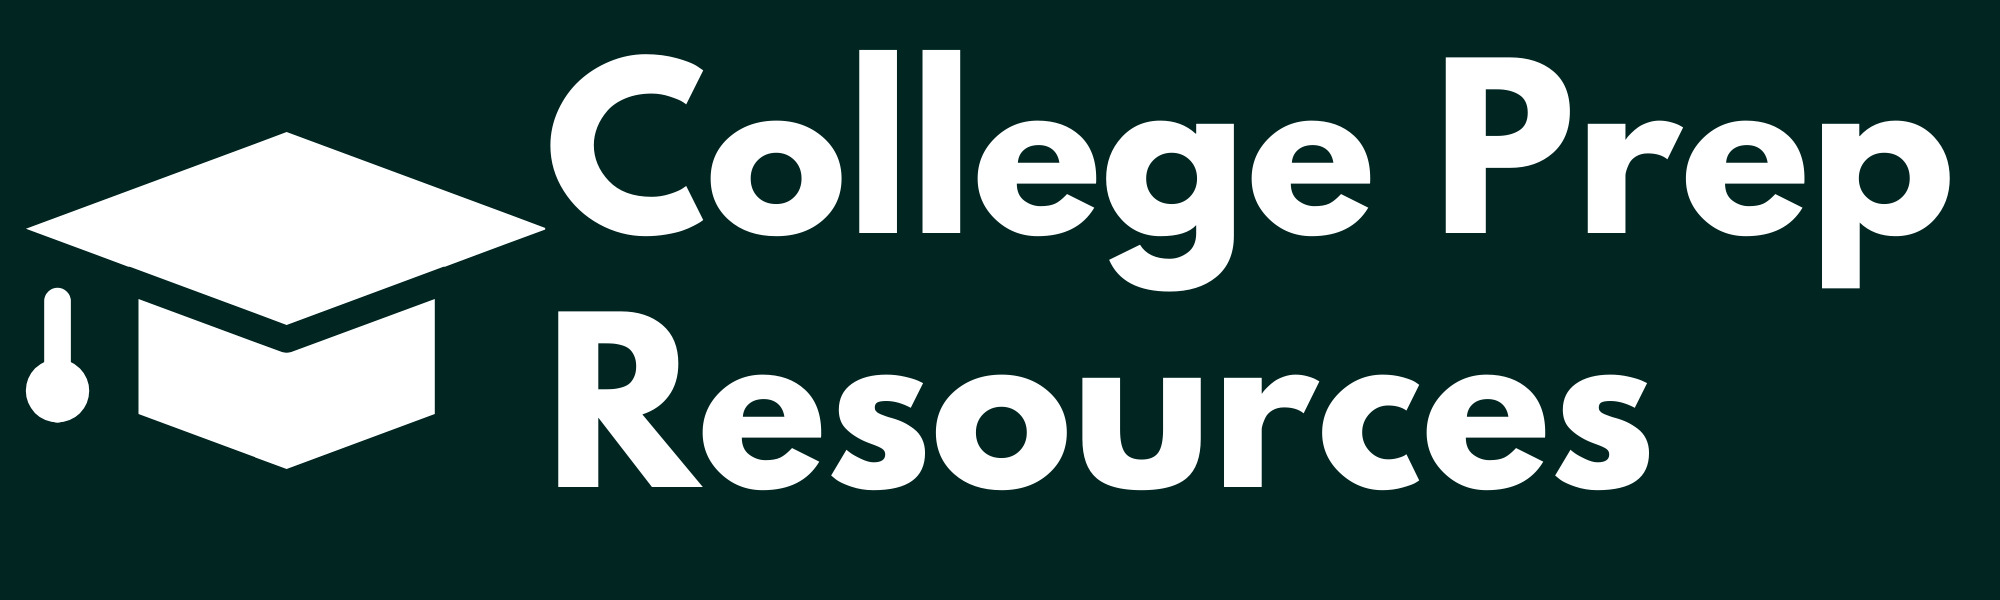 College Resource Page Link